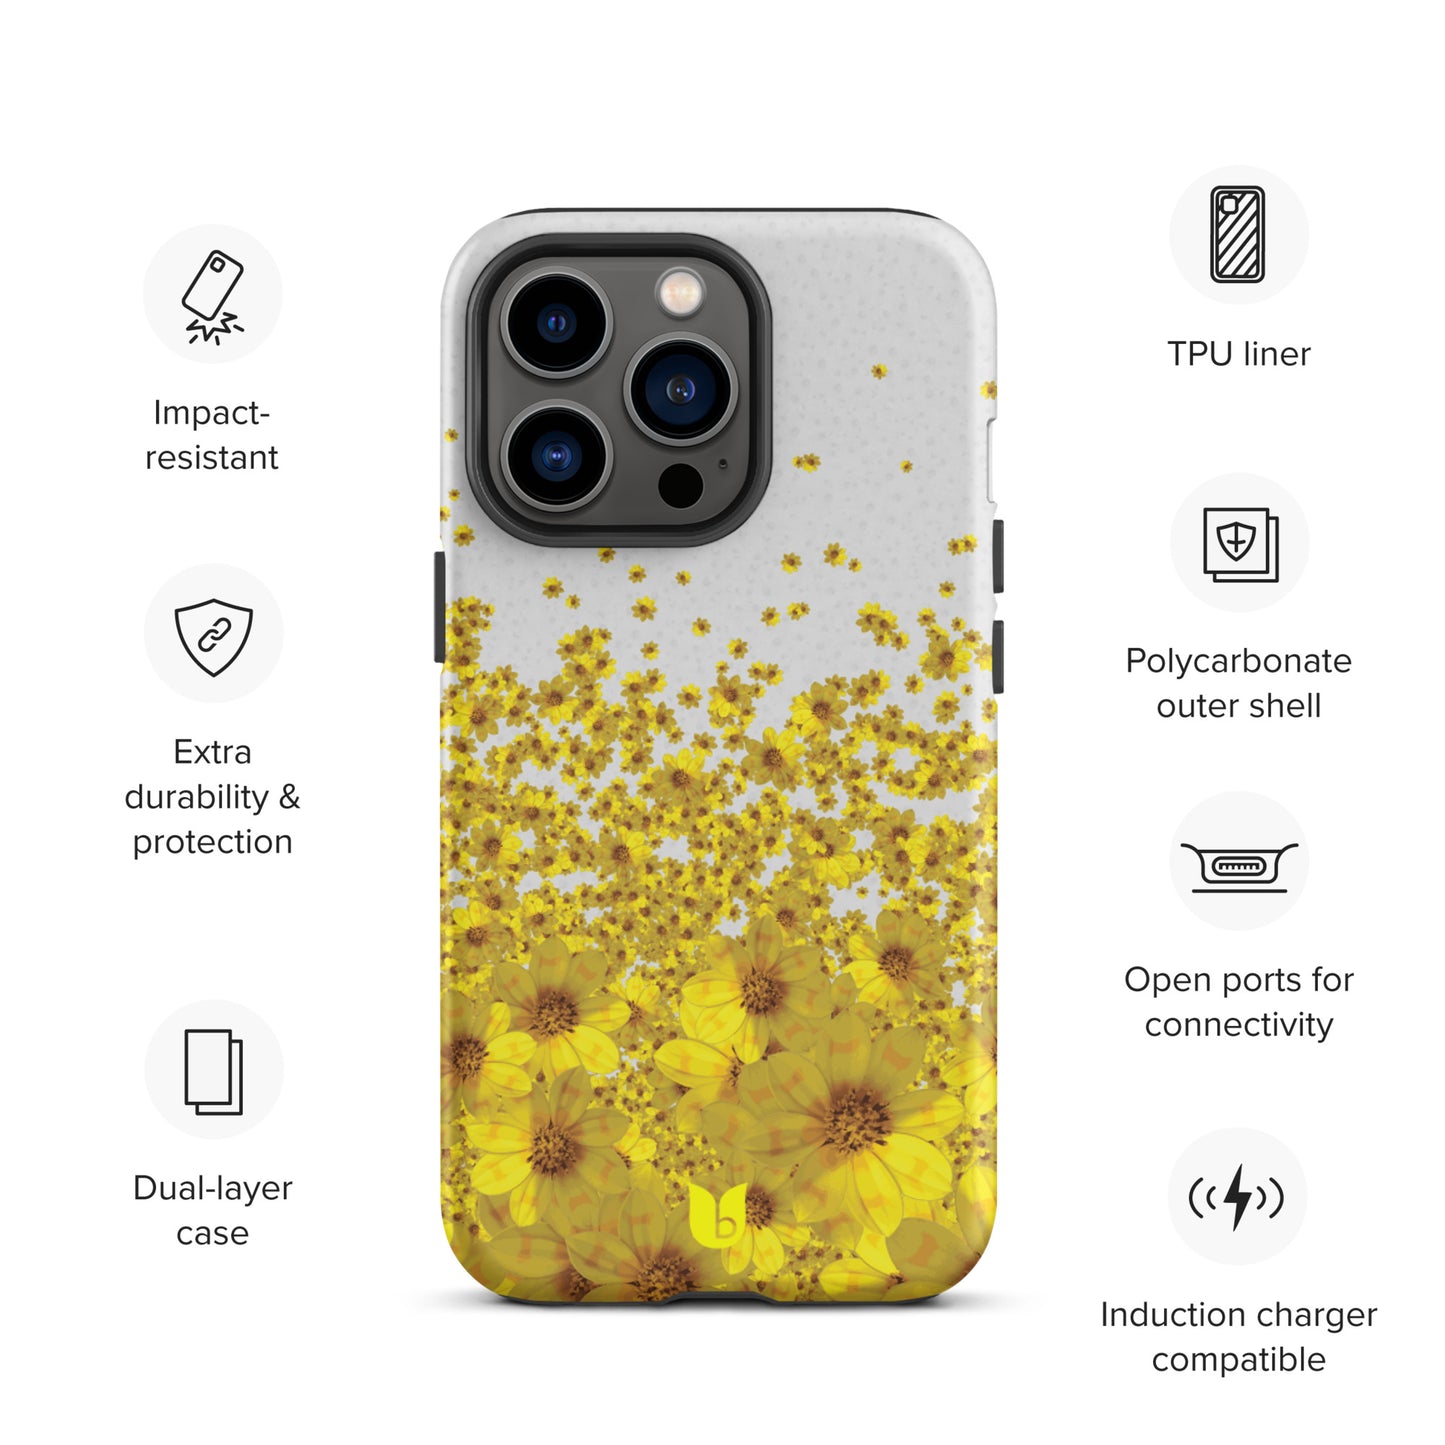 Floral Tough iPhone Case - Light Grey and Yellow, Yellow Daisy Flower All-Over-Print iPhone Case, Yellow iPhone Case, Grey and Yellow iPhone Case - bukulu